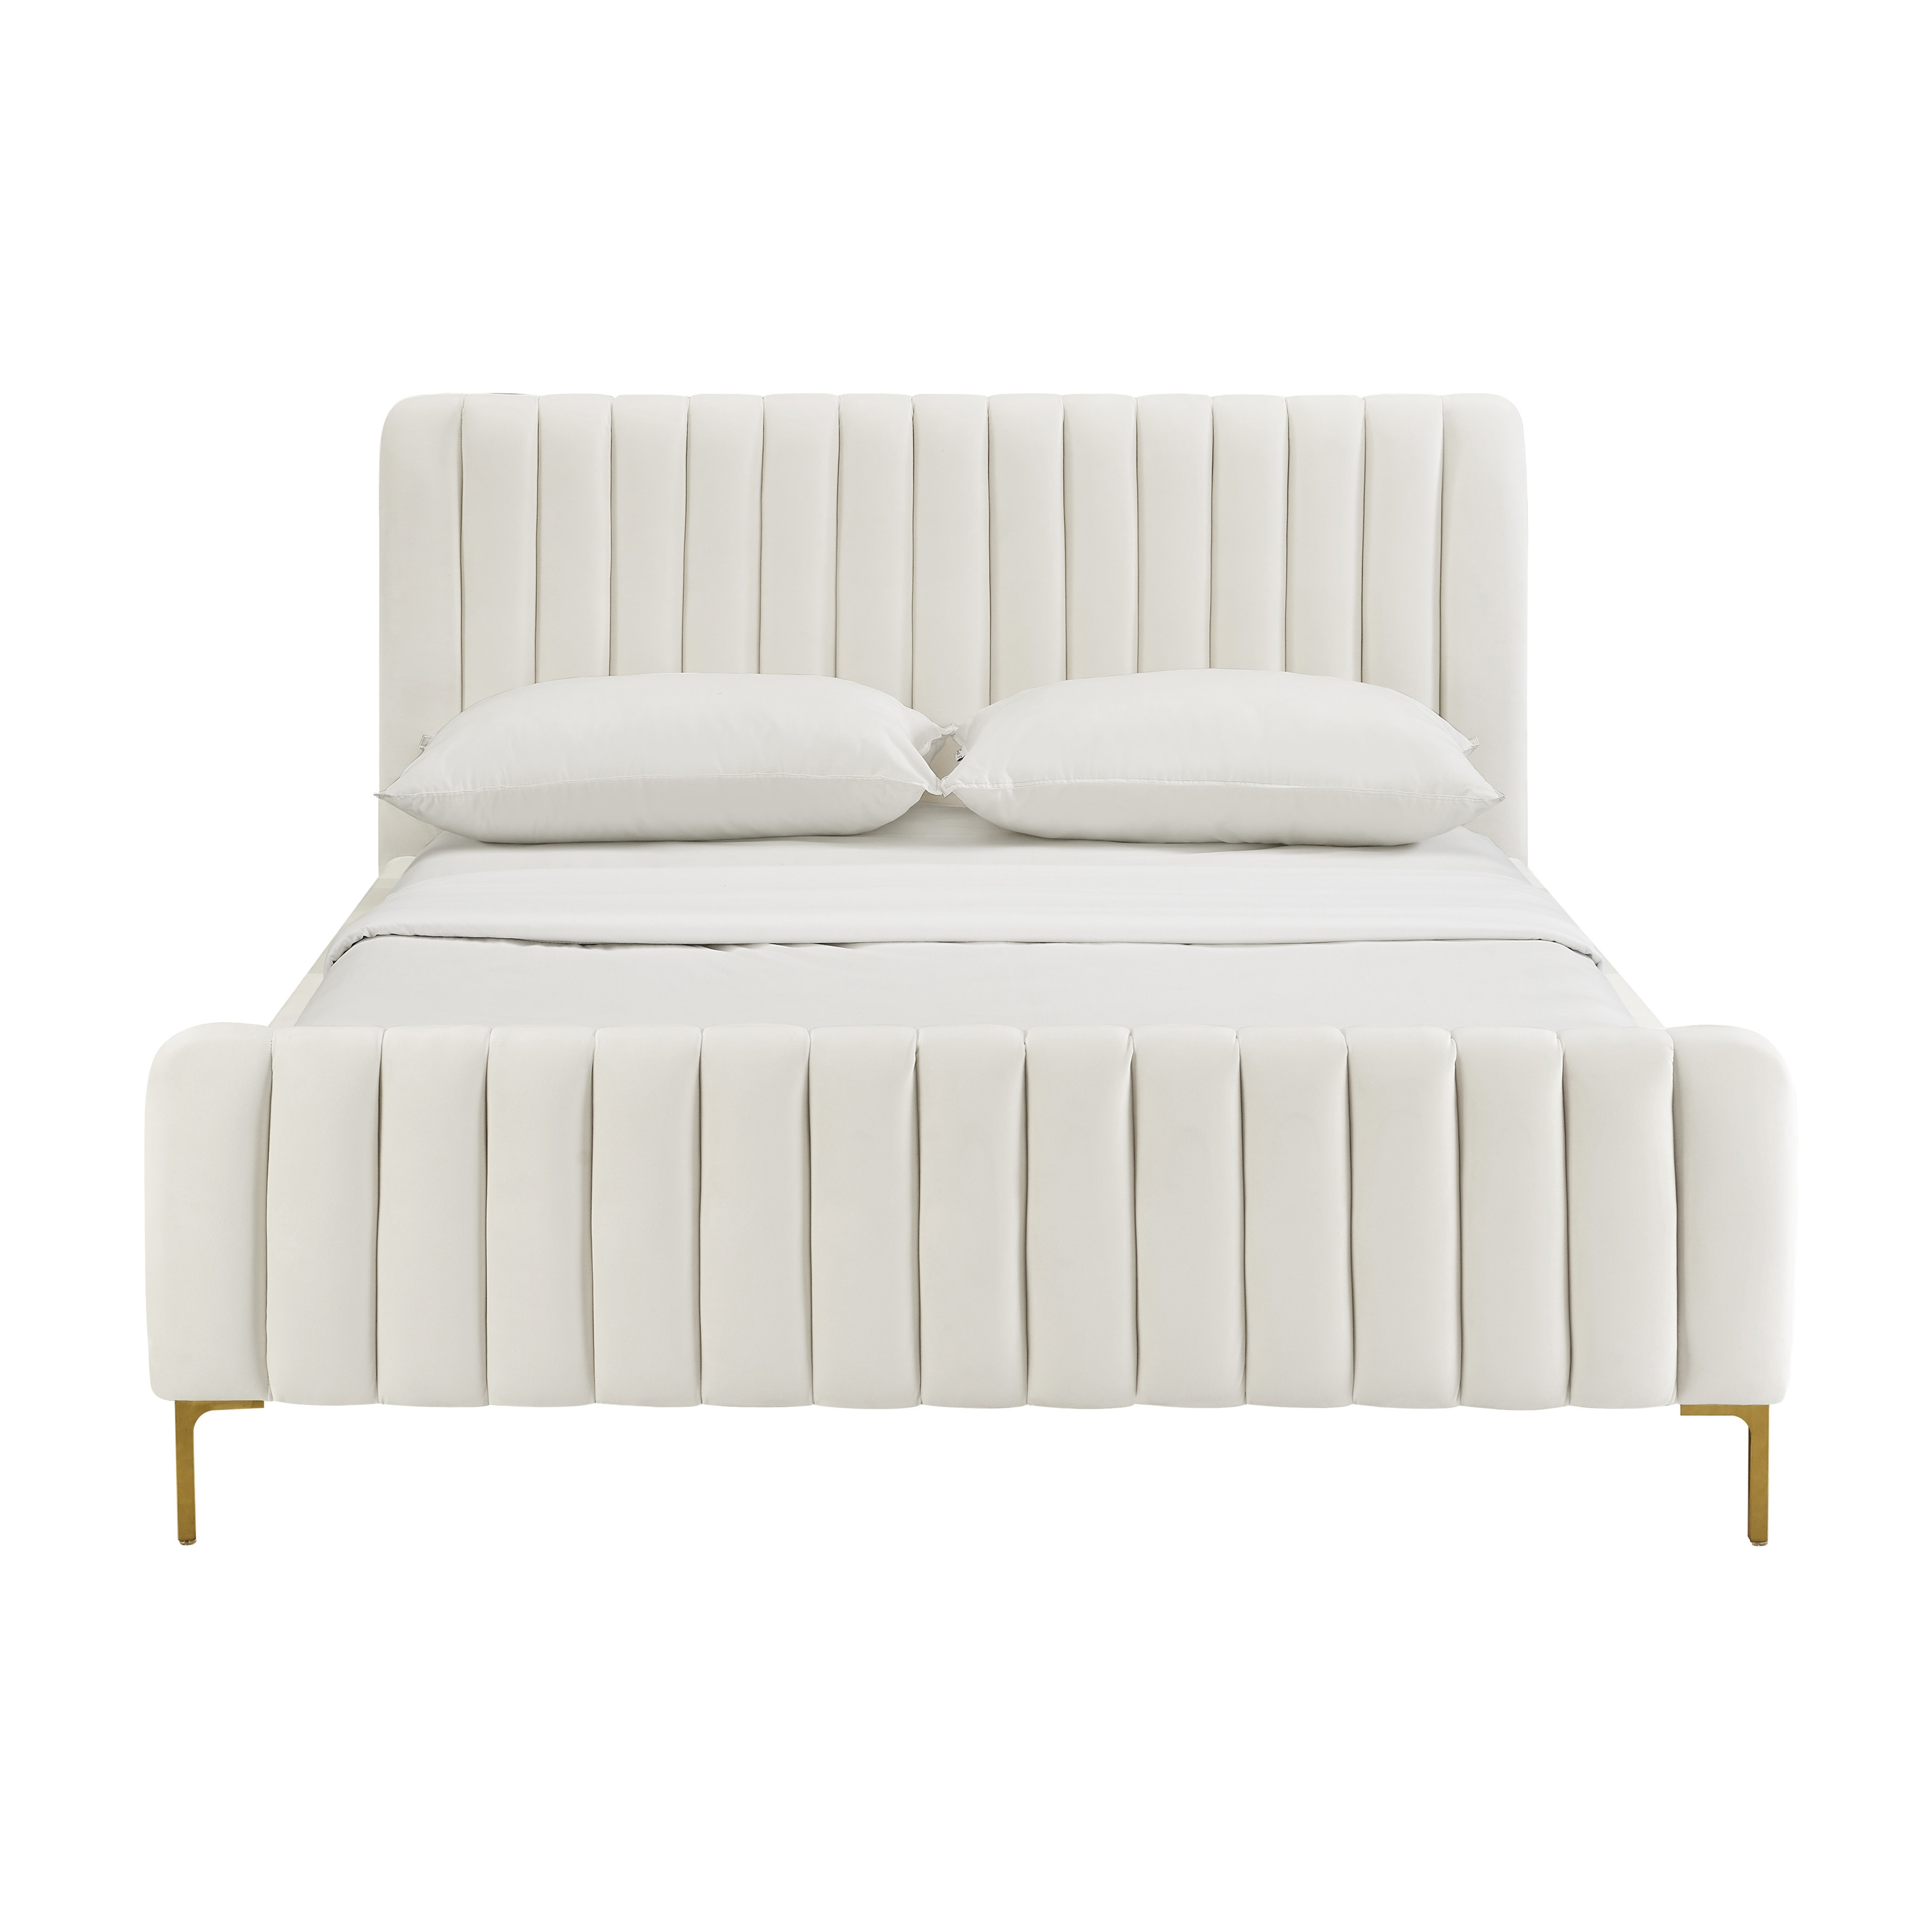 Victoria Cream Bed in King - Image 2